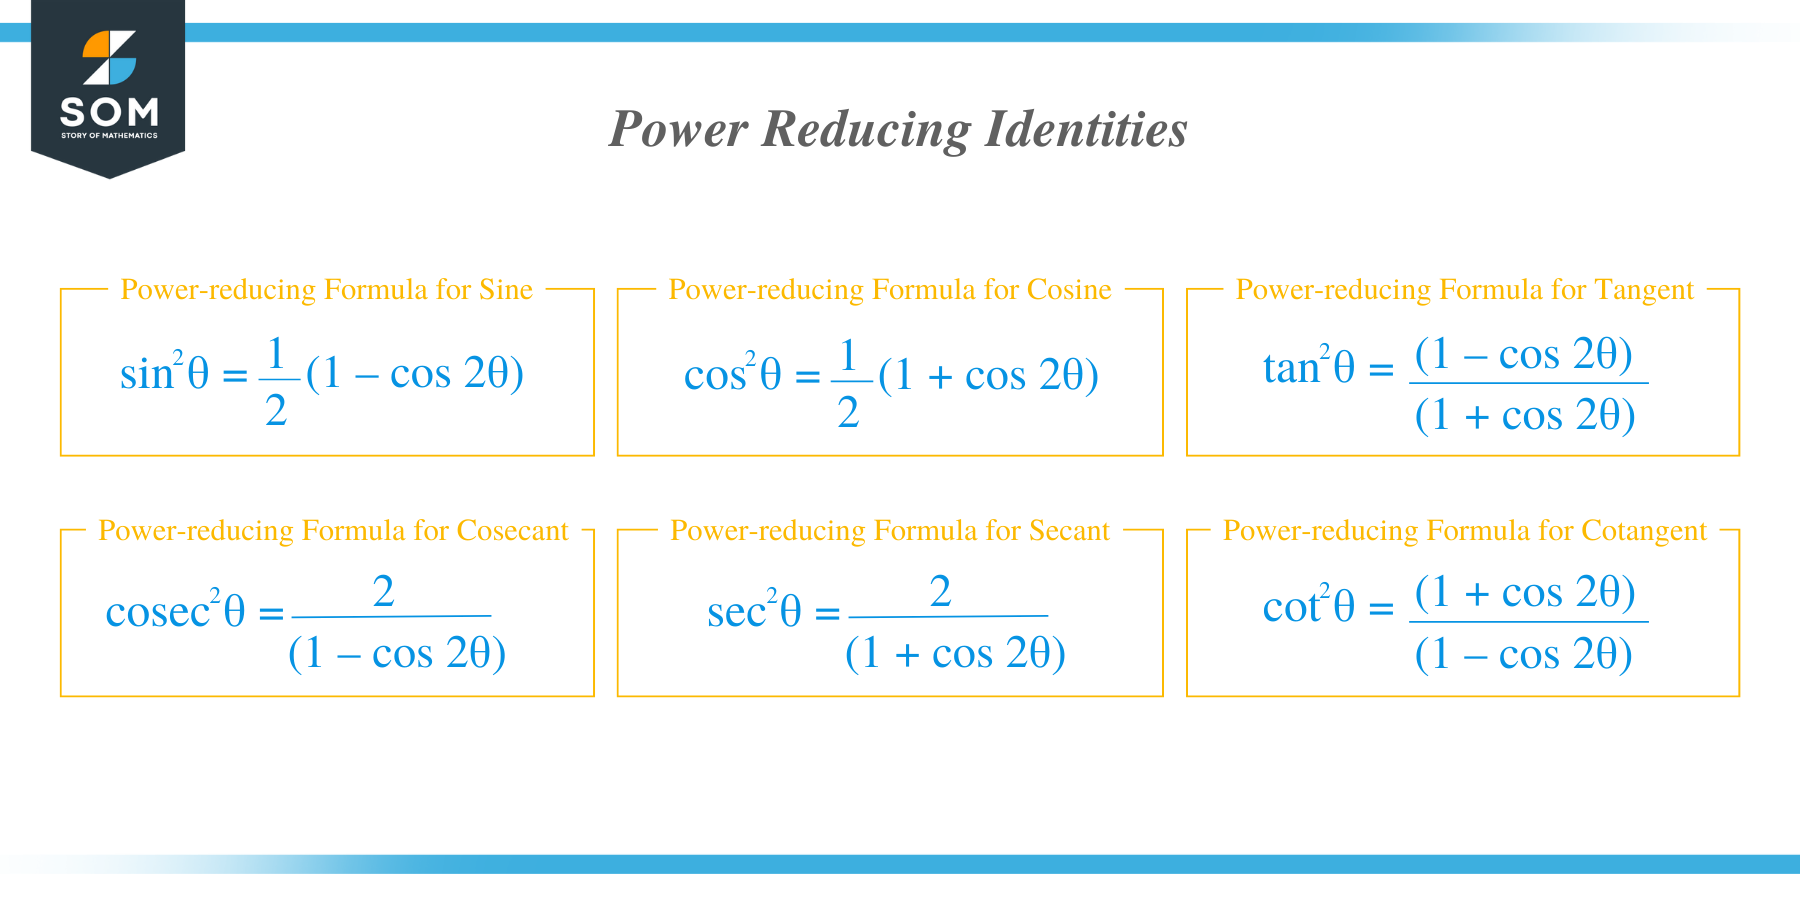 What are power reducing identities?   